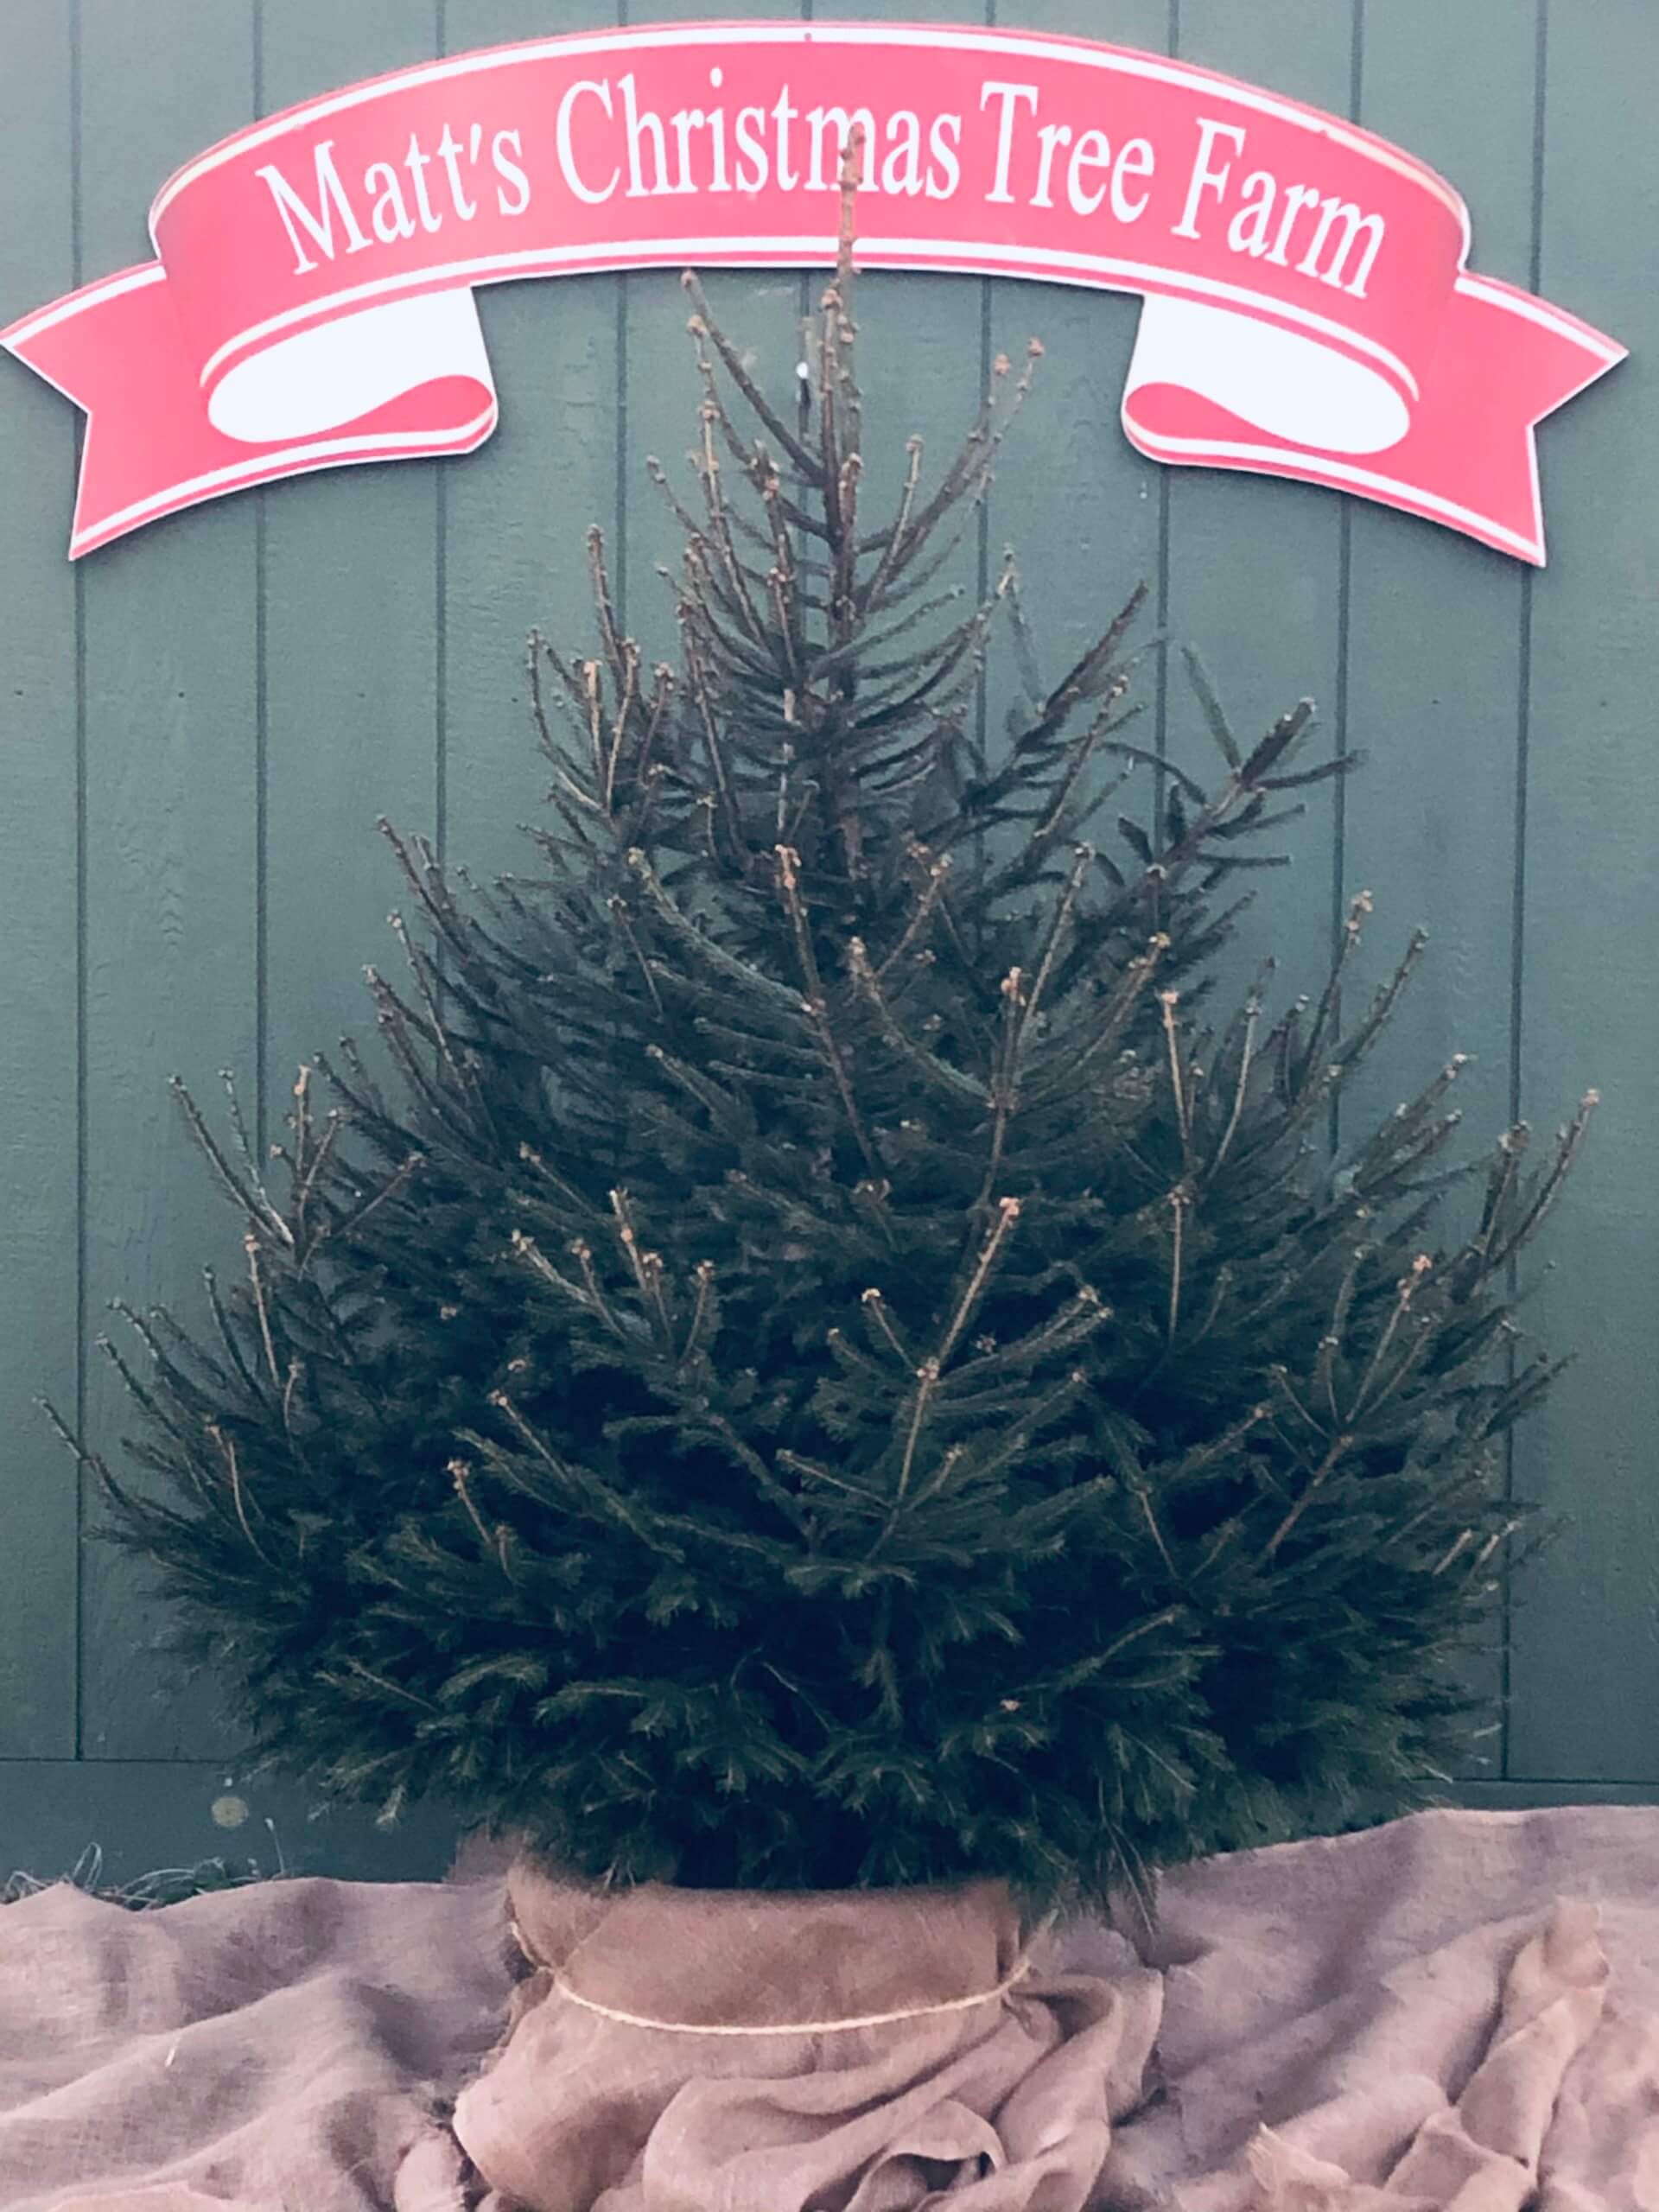 Where To Buy Christmas Tree With Root Ball?